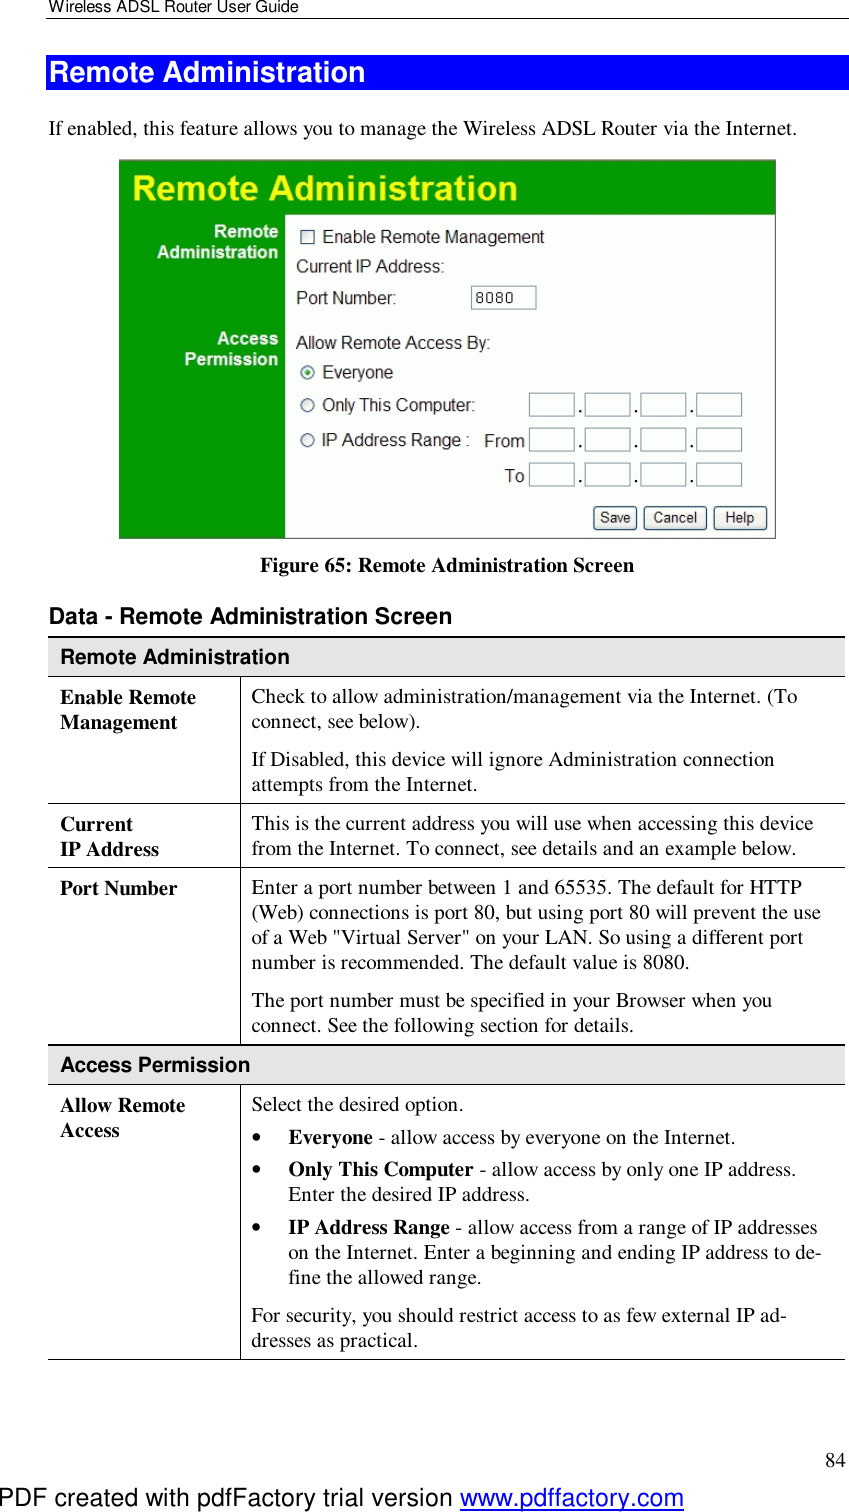 Wireless ADSL Router User Guide 84 Remote Administration If enabled, this feature allows you to manage the Wireless ADSL Router via the Internet.      Figure 65: Remote Administration Screen Data - Remote Administration Screen Remote Administration Enable Remote Management Check to allow administration/management via the Internet. (To connect, see below).  If Disabled, this device will ignore Administration connection attempts from the Internet. Current  IP Address This is the current address you will use when accessing this device from the Internet. To connect, see details and an example below. Port Number Enter a port number between 1 and 65535. The default for HTTP (Web) connections is port 80, but using port 80 will prevent the use of a Web &quot;Virtual Server&quot; on your LAN. So using a different port number is recommended. The default value is 8080.  The port number must be specified in your Browser when you connect. See the following section for details. Access Permission Allow Remote Access Select the desired option.  •  Everyone - allow access by everyone on the Internet.  •  Only This Computer - allow access by only one IP address. Enter the desired IP address.  •  IP Address Range - allow access from a range of IP addresses on the Internet. Enter a beginning and ending IP address to de-fine the allowed range.  For security, you should restrict access to as few external IP ad-dresses as practical.  PDF created with pdfFactory trial version www.pdffactory.com